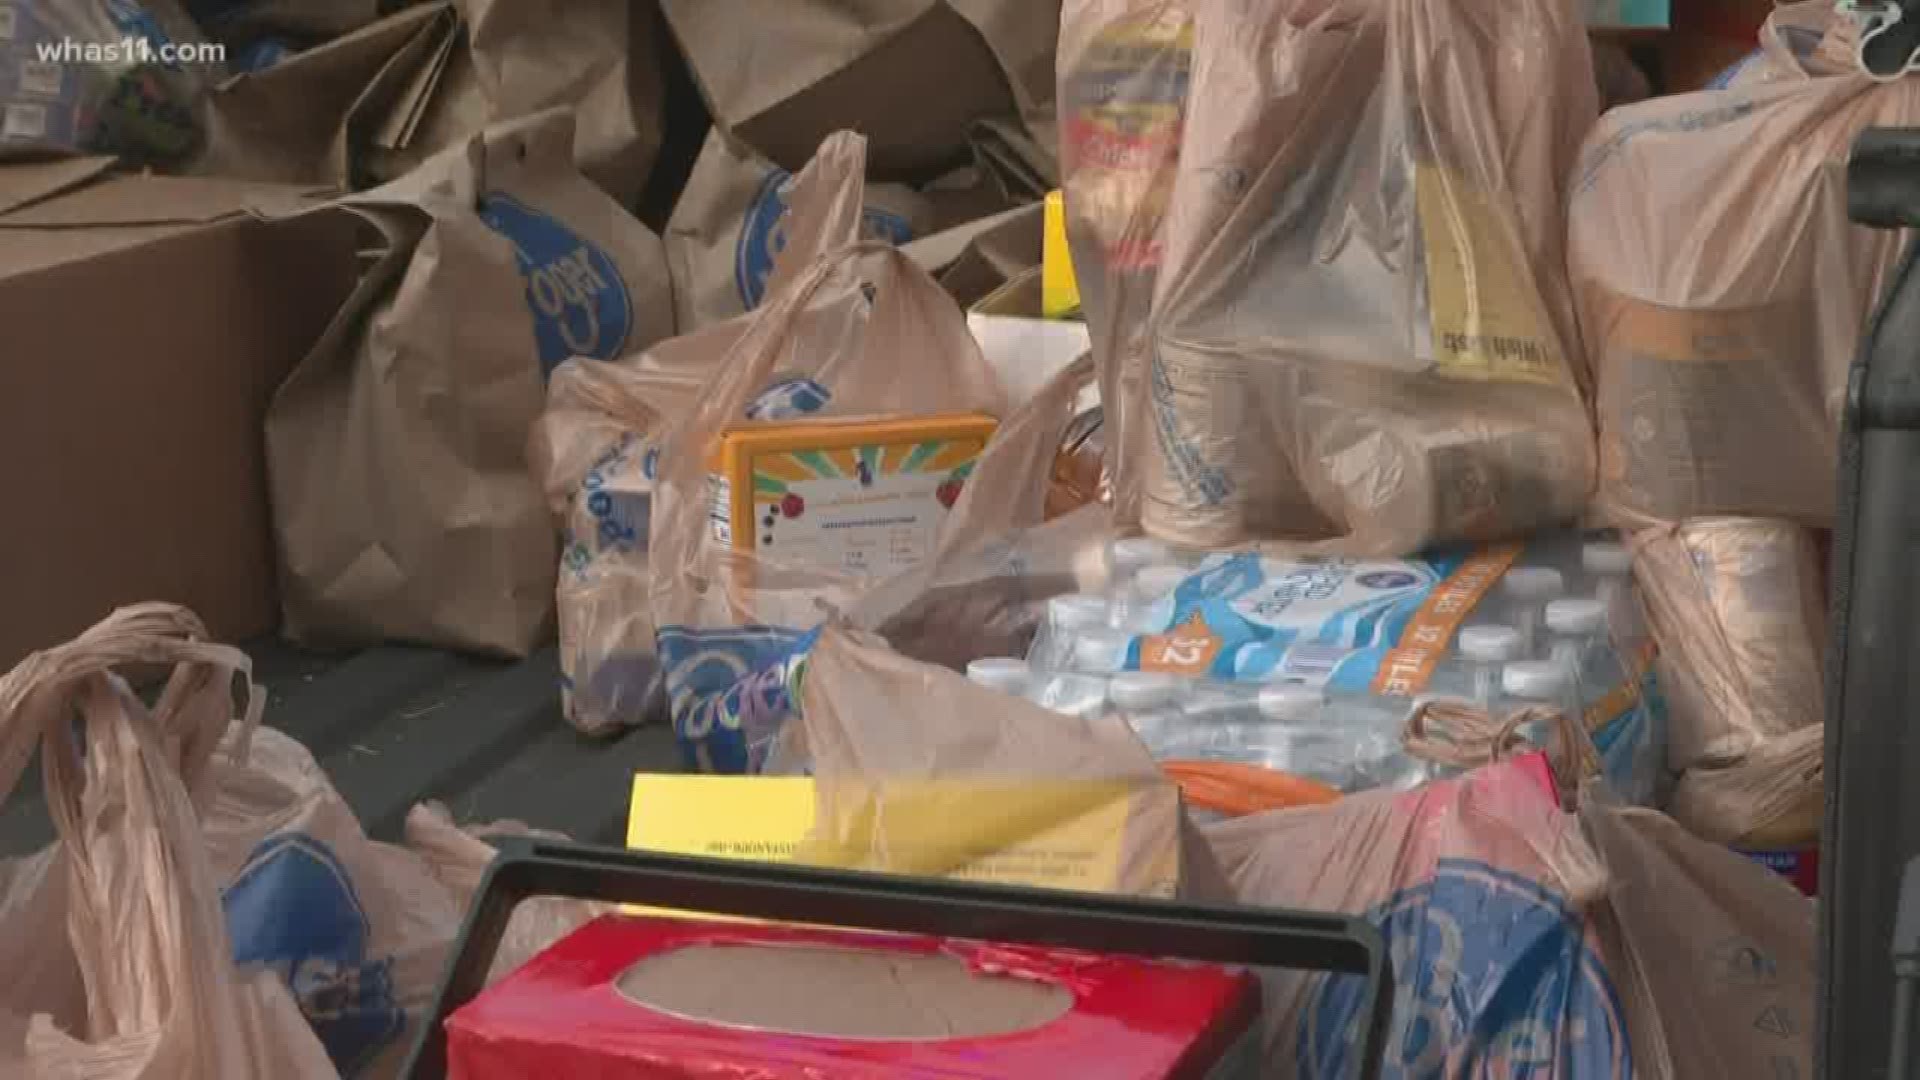 Kentucky State Police held their annual 'Cram the Cruiser' food drive to help needy families across the state during the holidays.